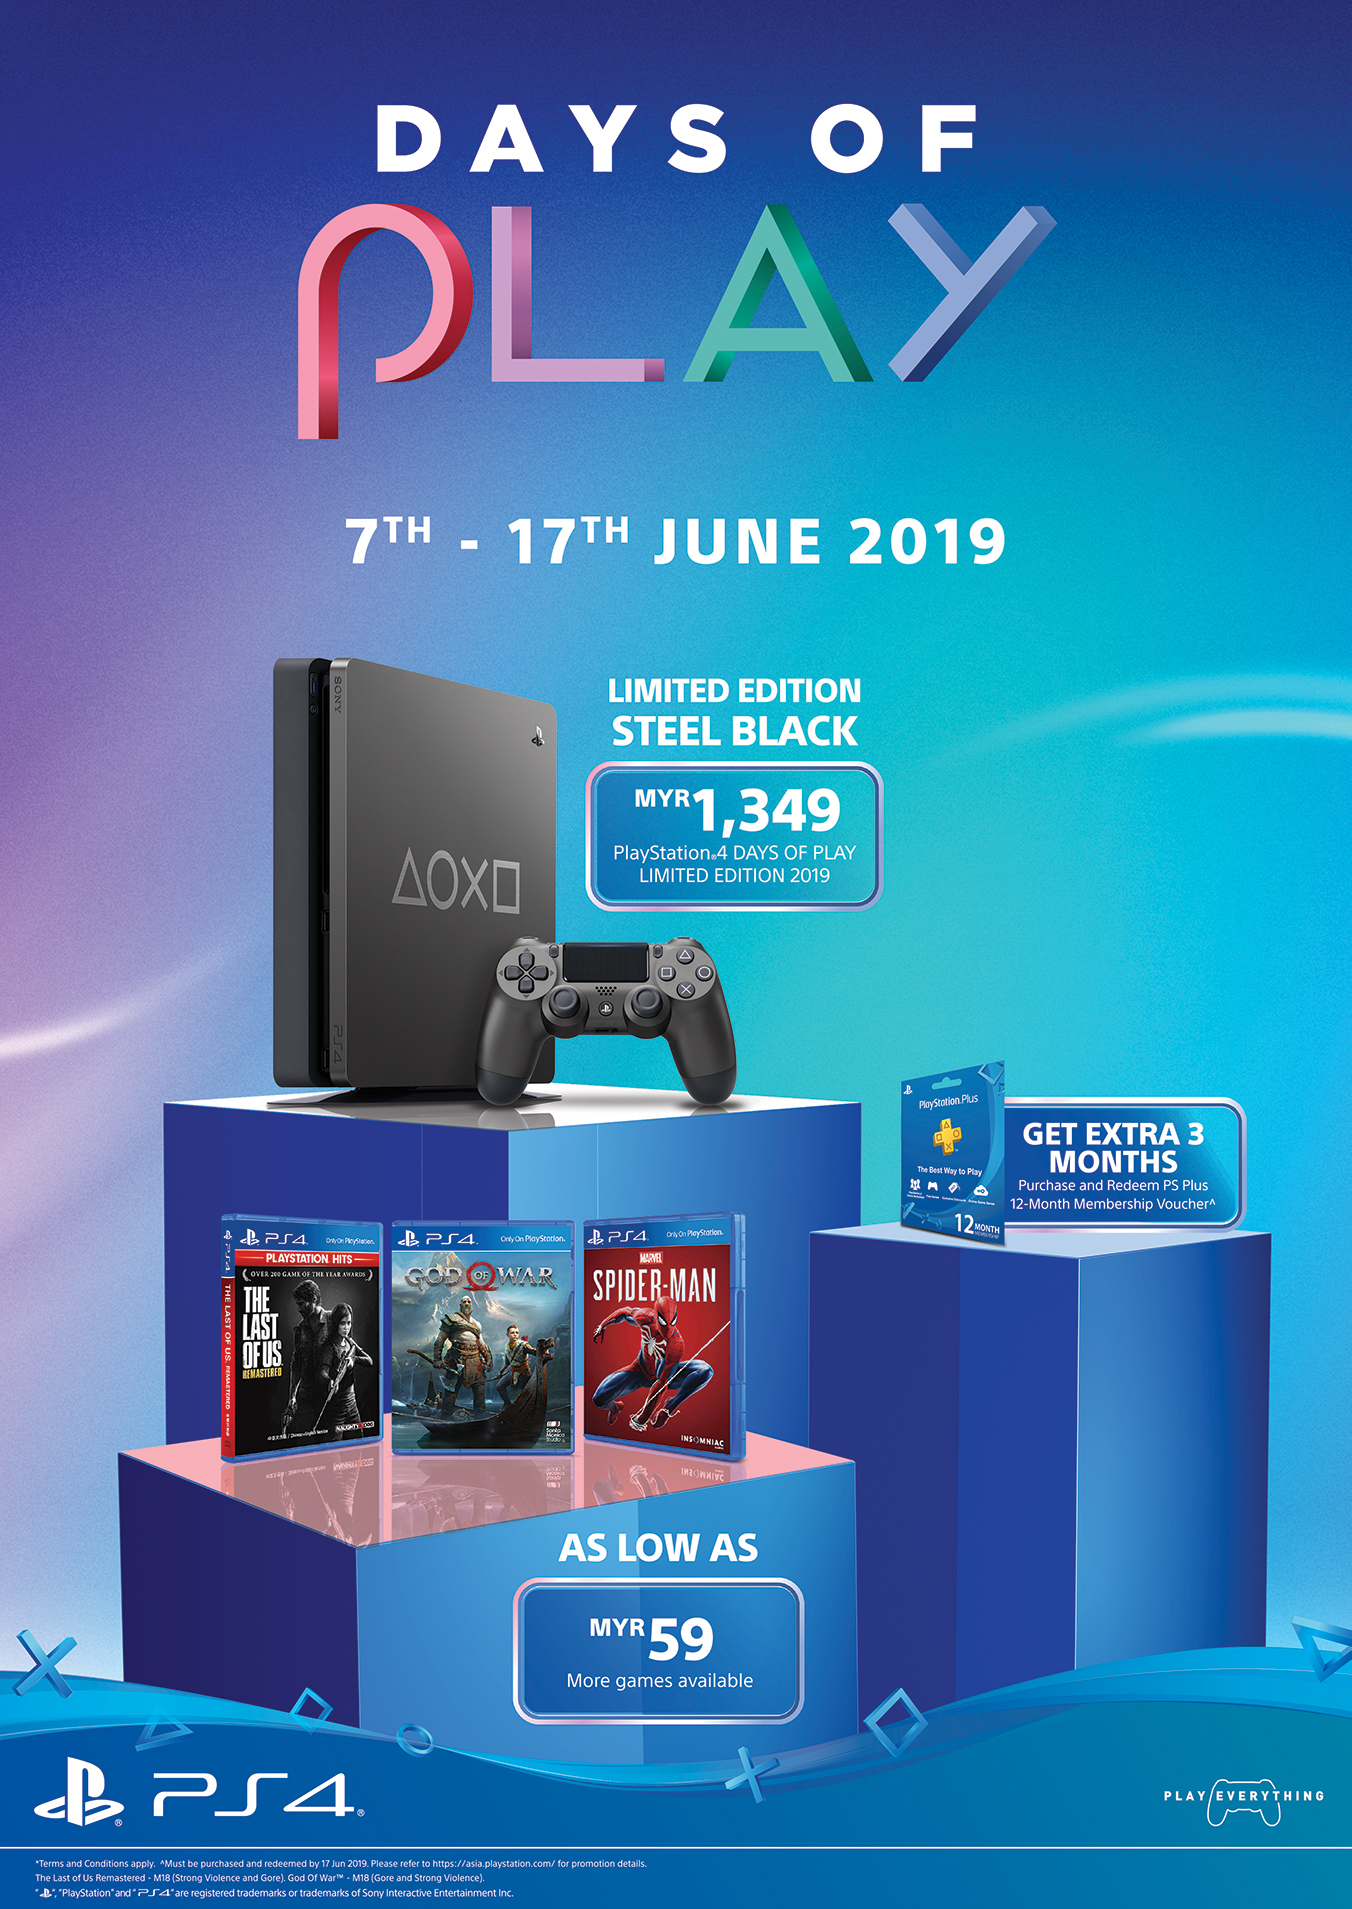 PS4 DAYS OF PLAY LIMITED EDITION AVAILABLE FROM JUNE 7, 2019